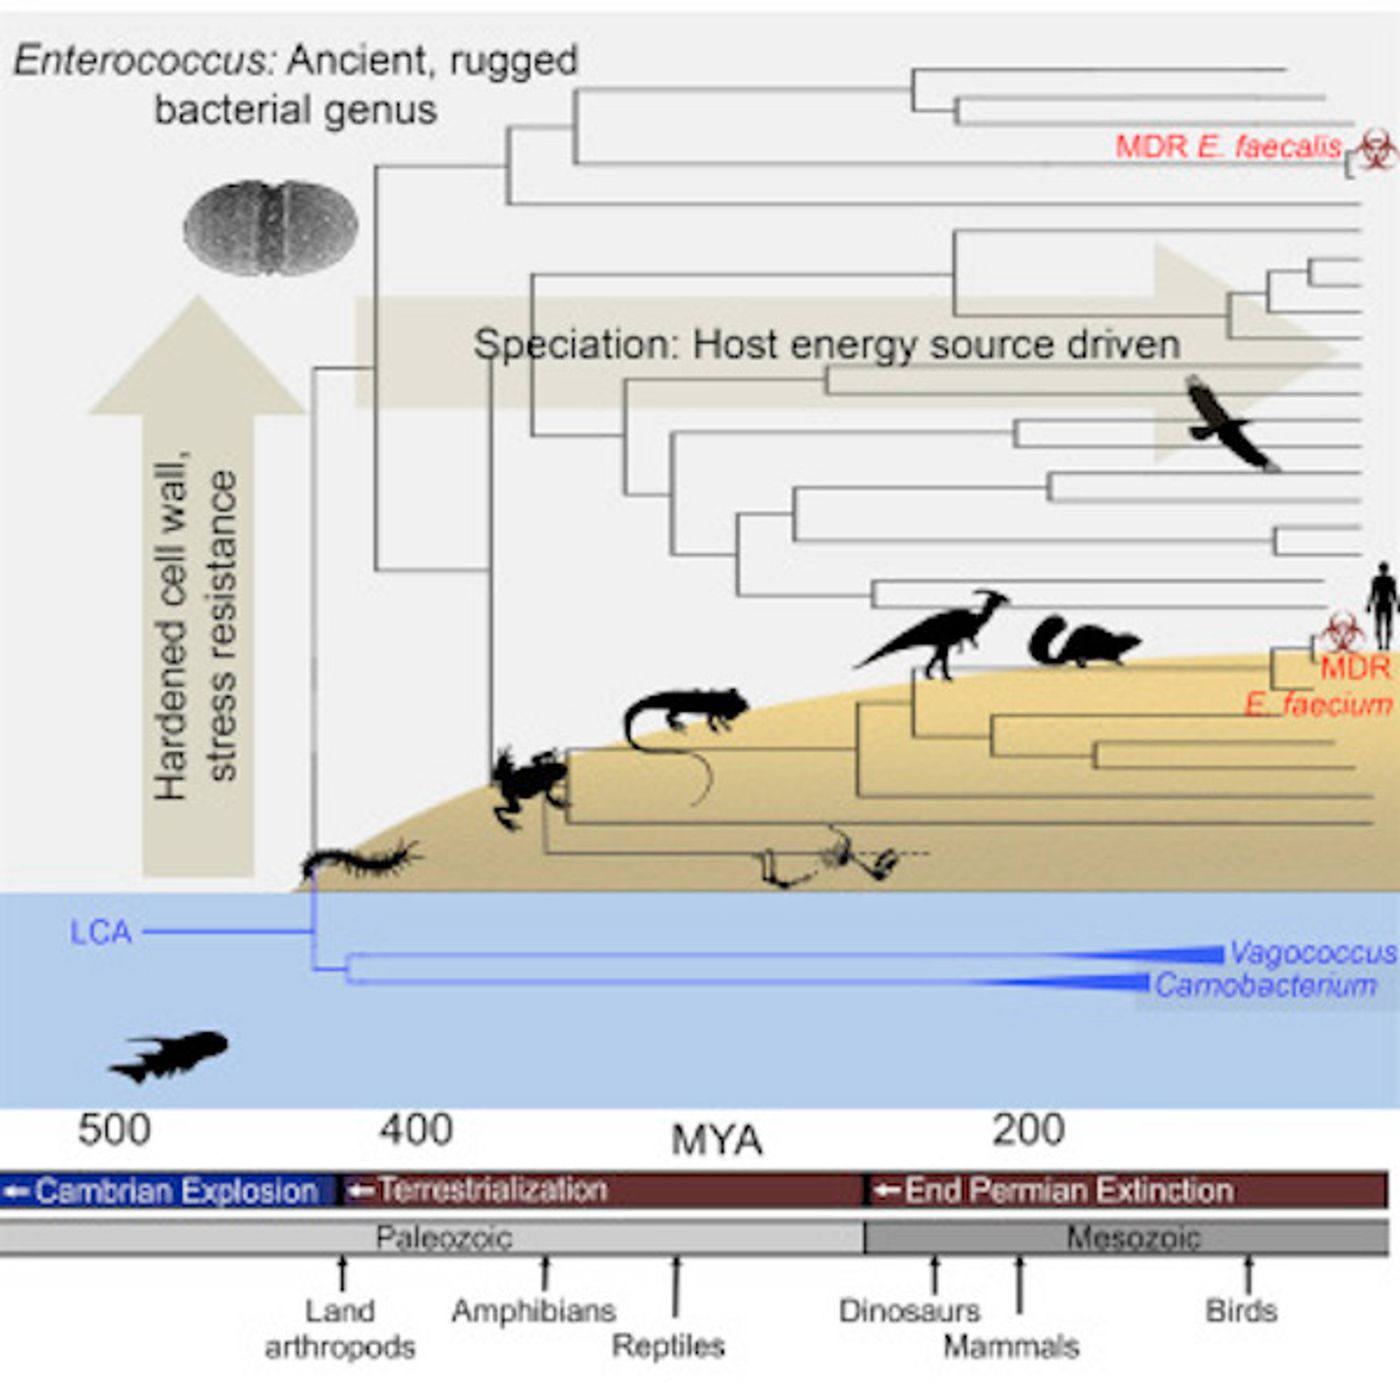 The evolutionary history of leading multidrug resistant hospital pathogens, the enterococci, and their origin hundreds of millions of years ago / Credit: Cell Lebreton et al